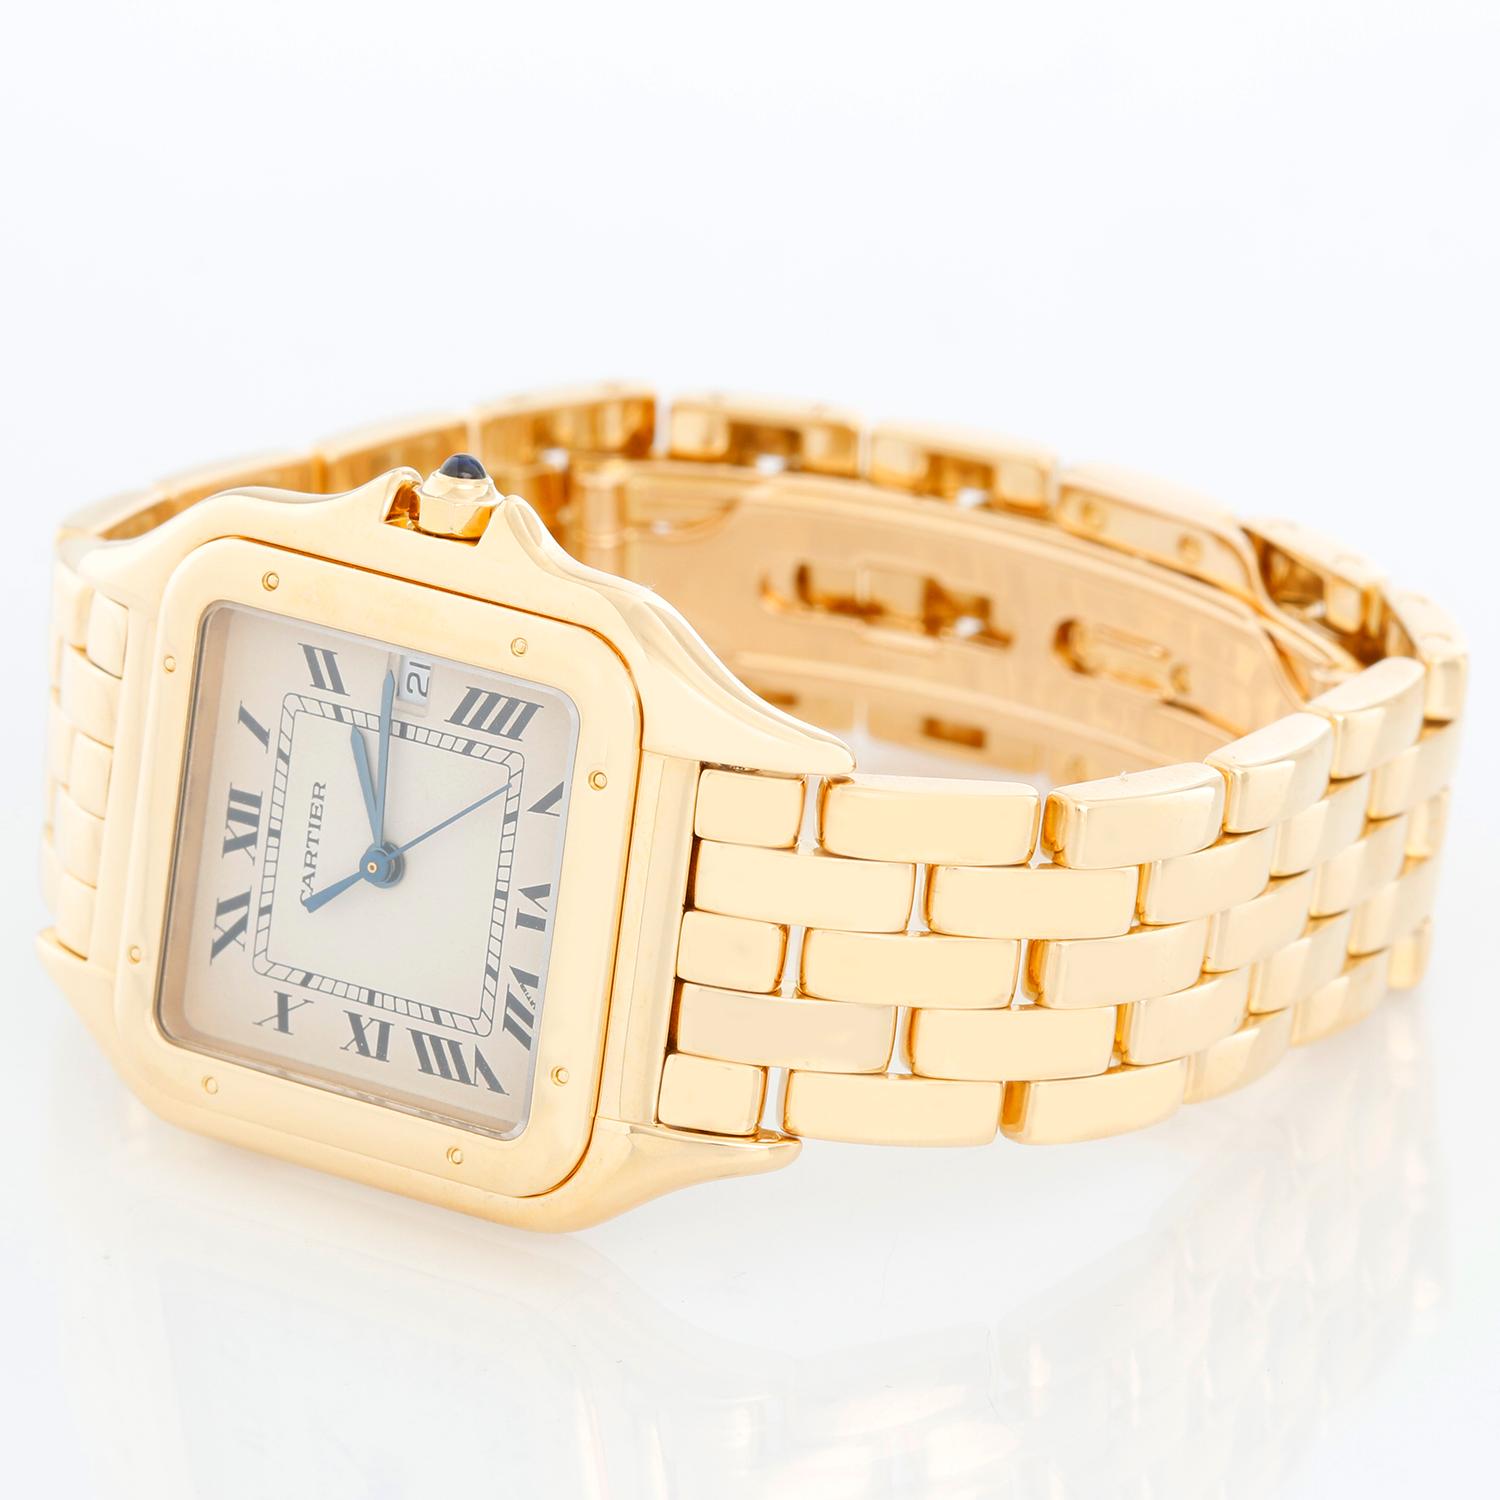 Cartier Jumbo Panther 18k Yellow Gold Men's Quartz Watch with Date W25014B9 - Quartz. 18k yellow gold case (27mm x 37mm). Ivory colored dial with black Roman numerals and date at 3 o'clock. 18k yellow gold Cartier Panther bracelet with deployant